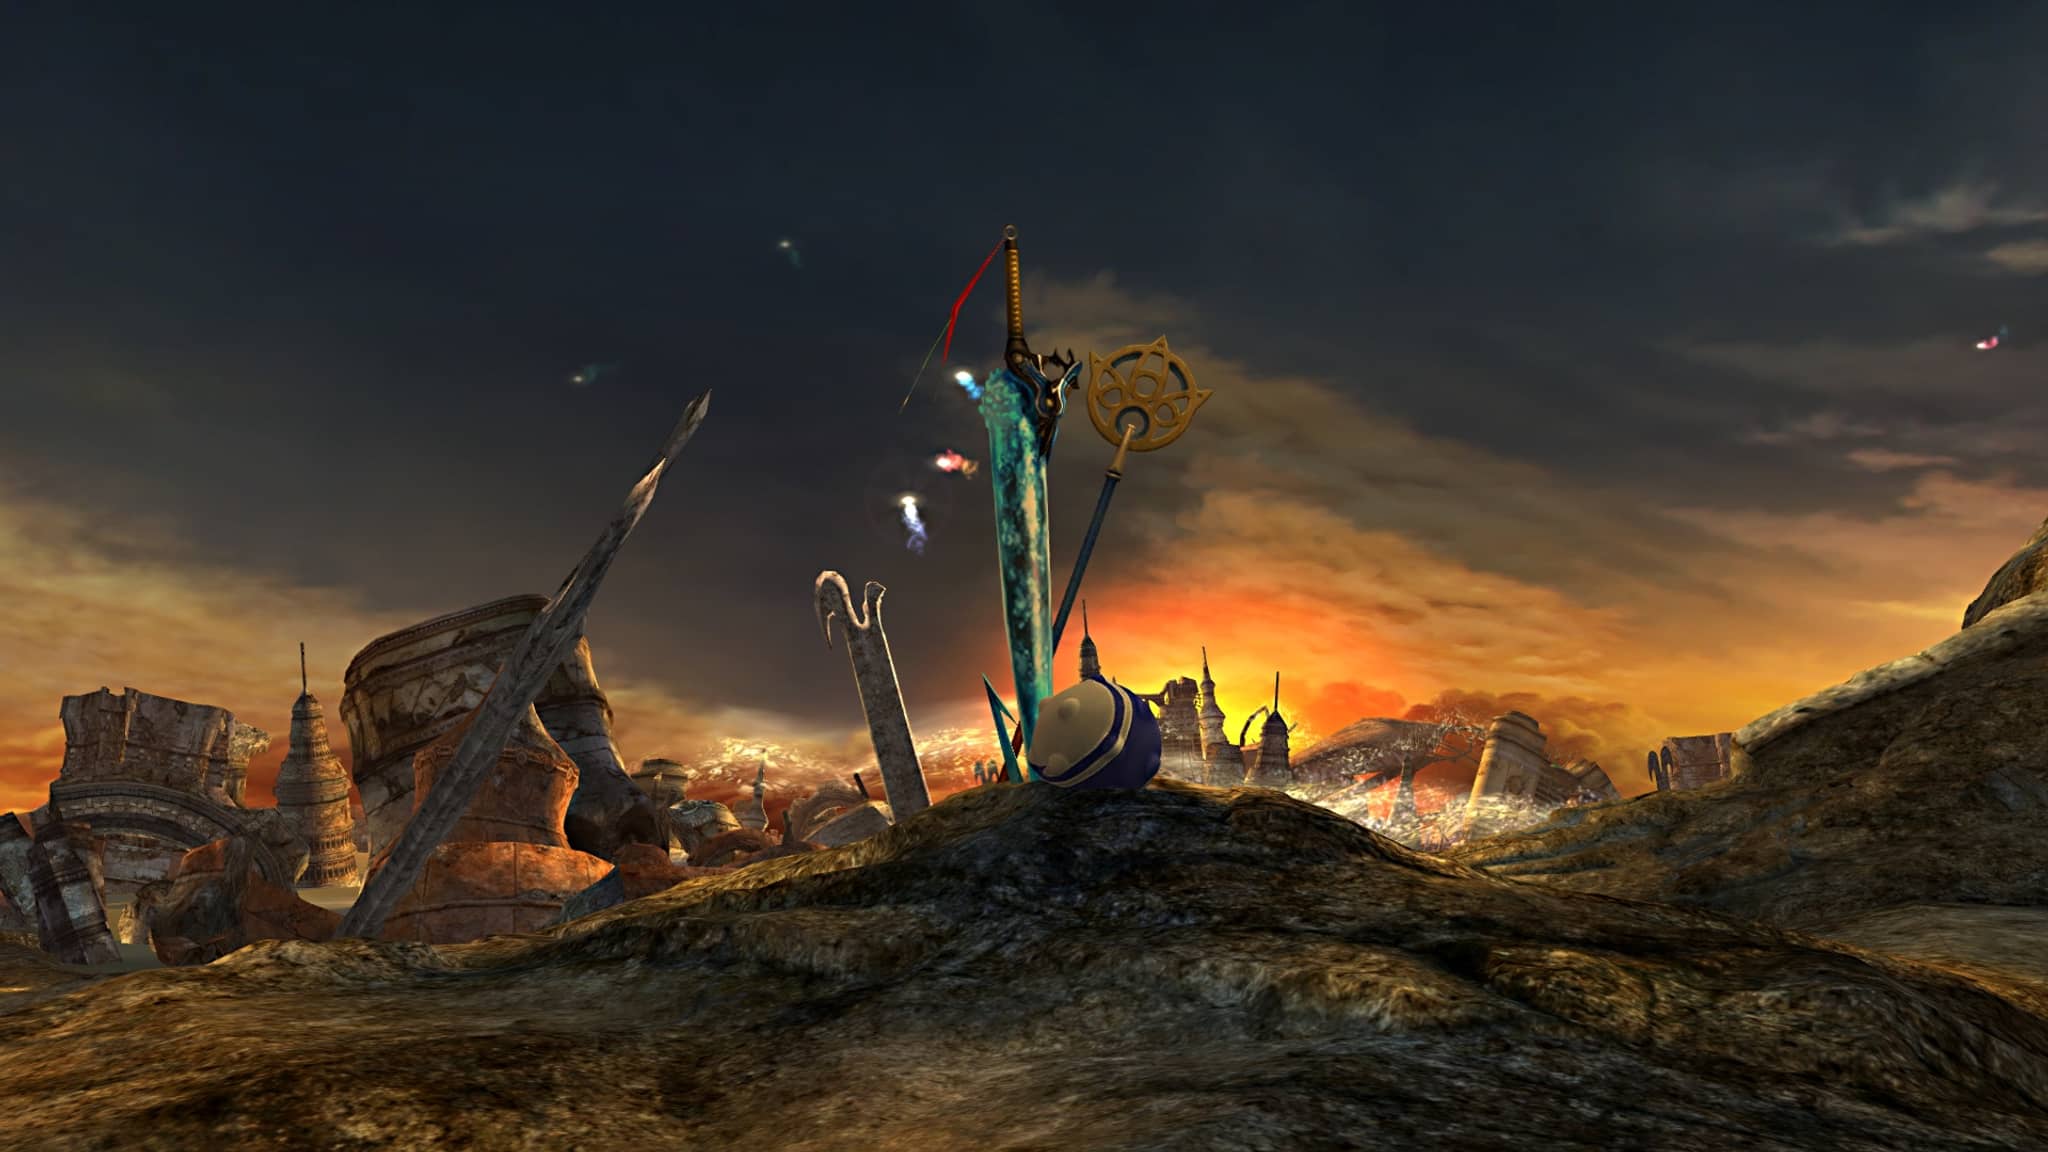 Zanarkand Ruins, which shows up in FFX opening before reaching the main menu.